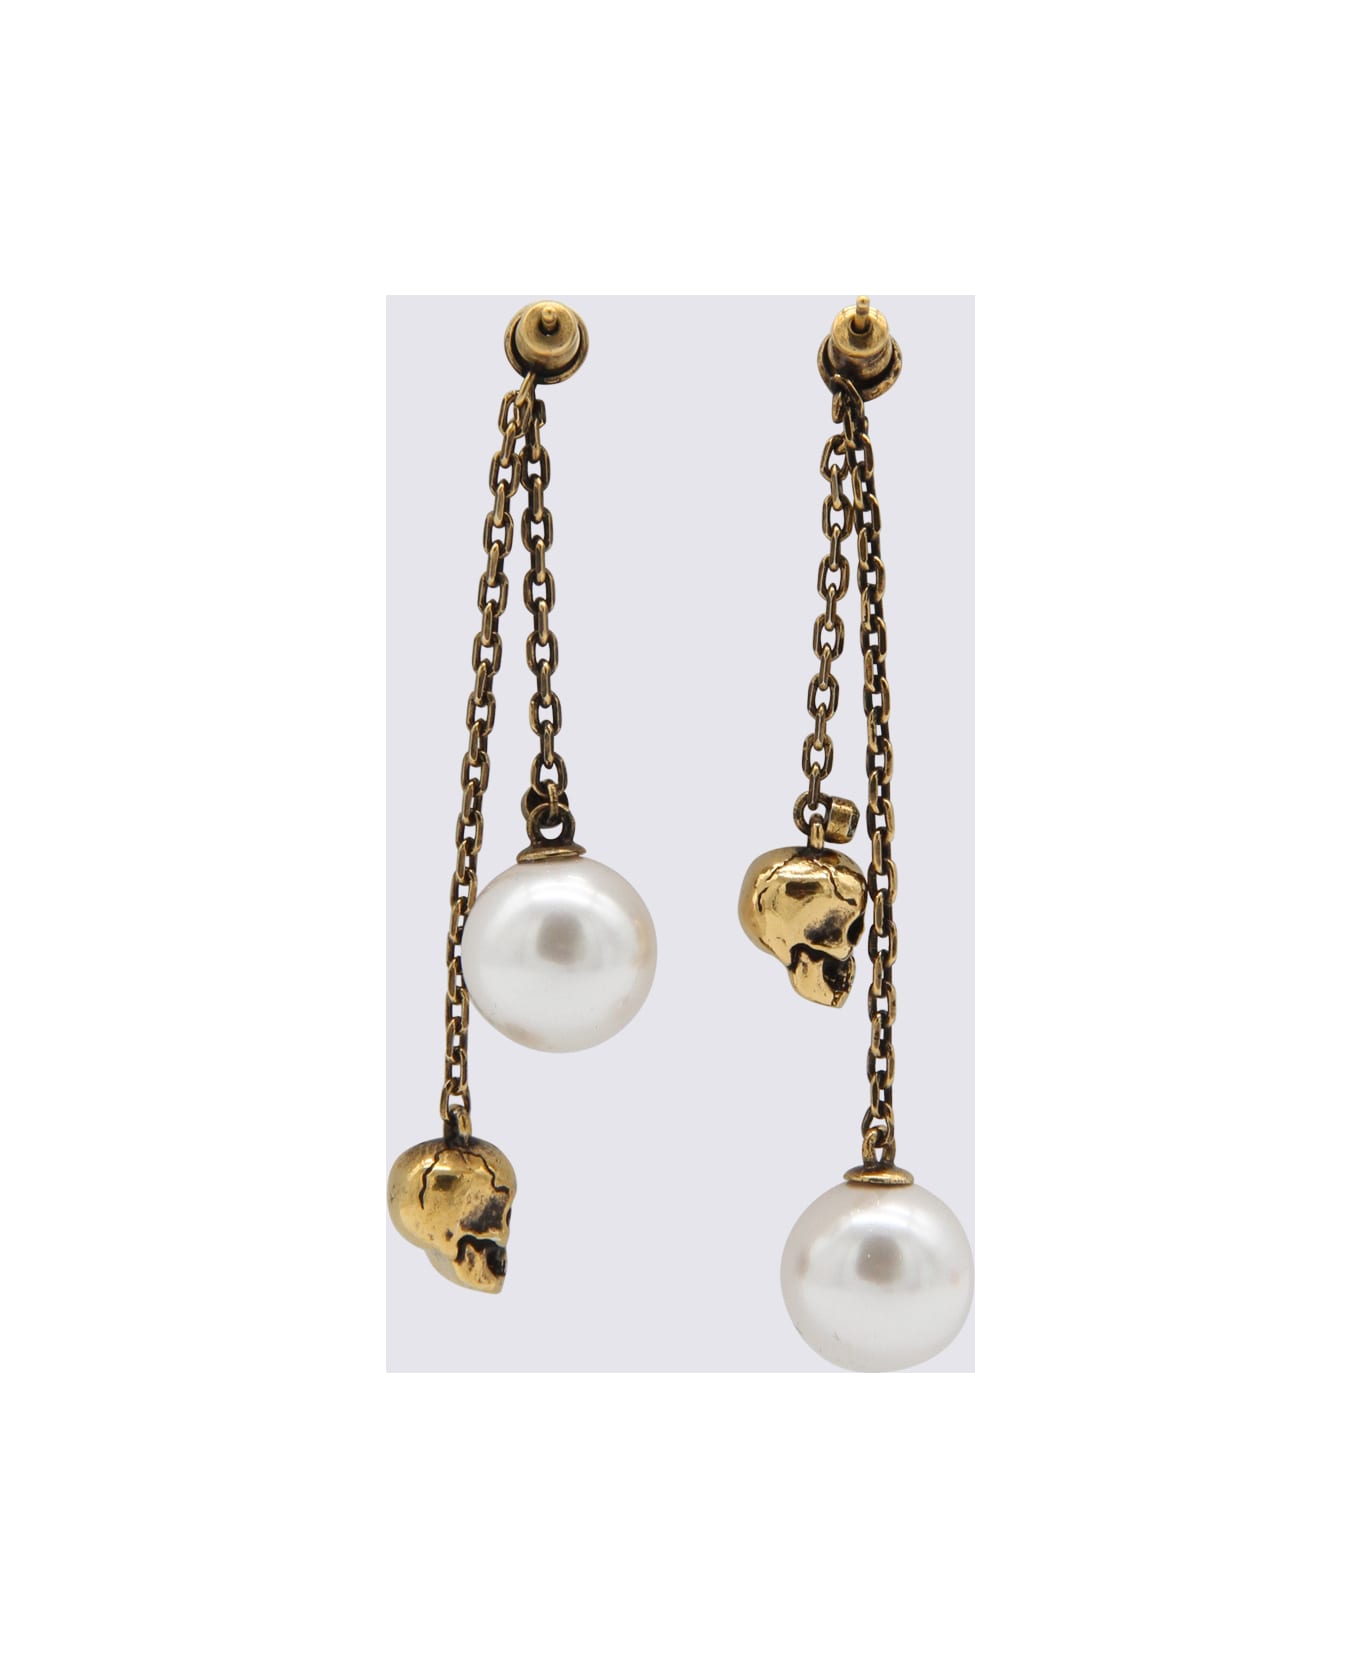 Alexander McQueen Antique Gold Metal And Pearl Skull Chain Earrings - MIX イヤリング